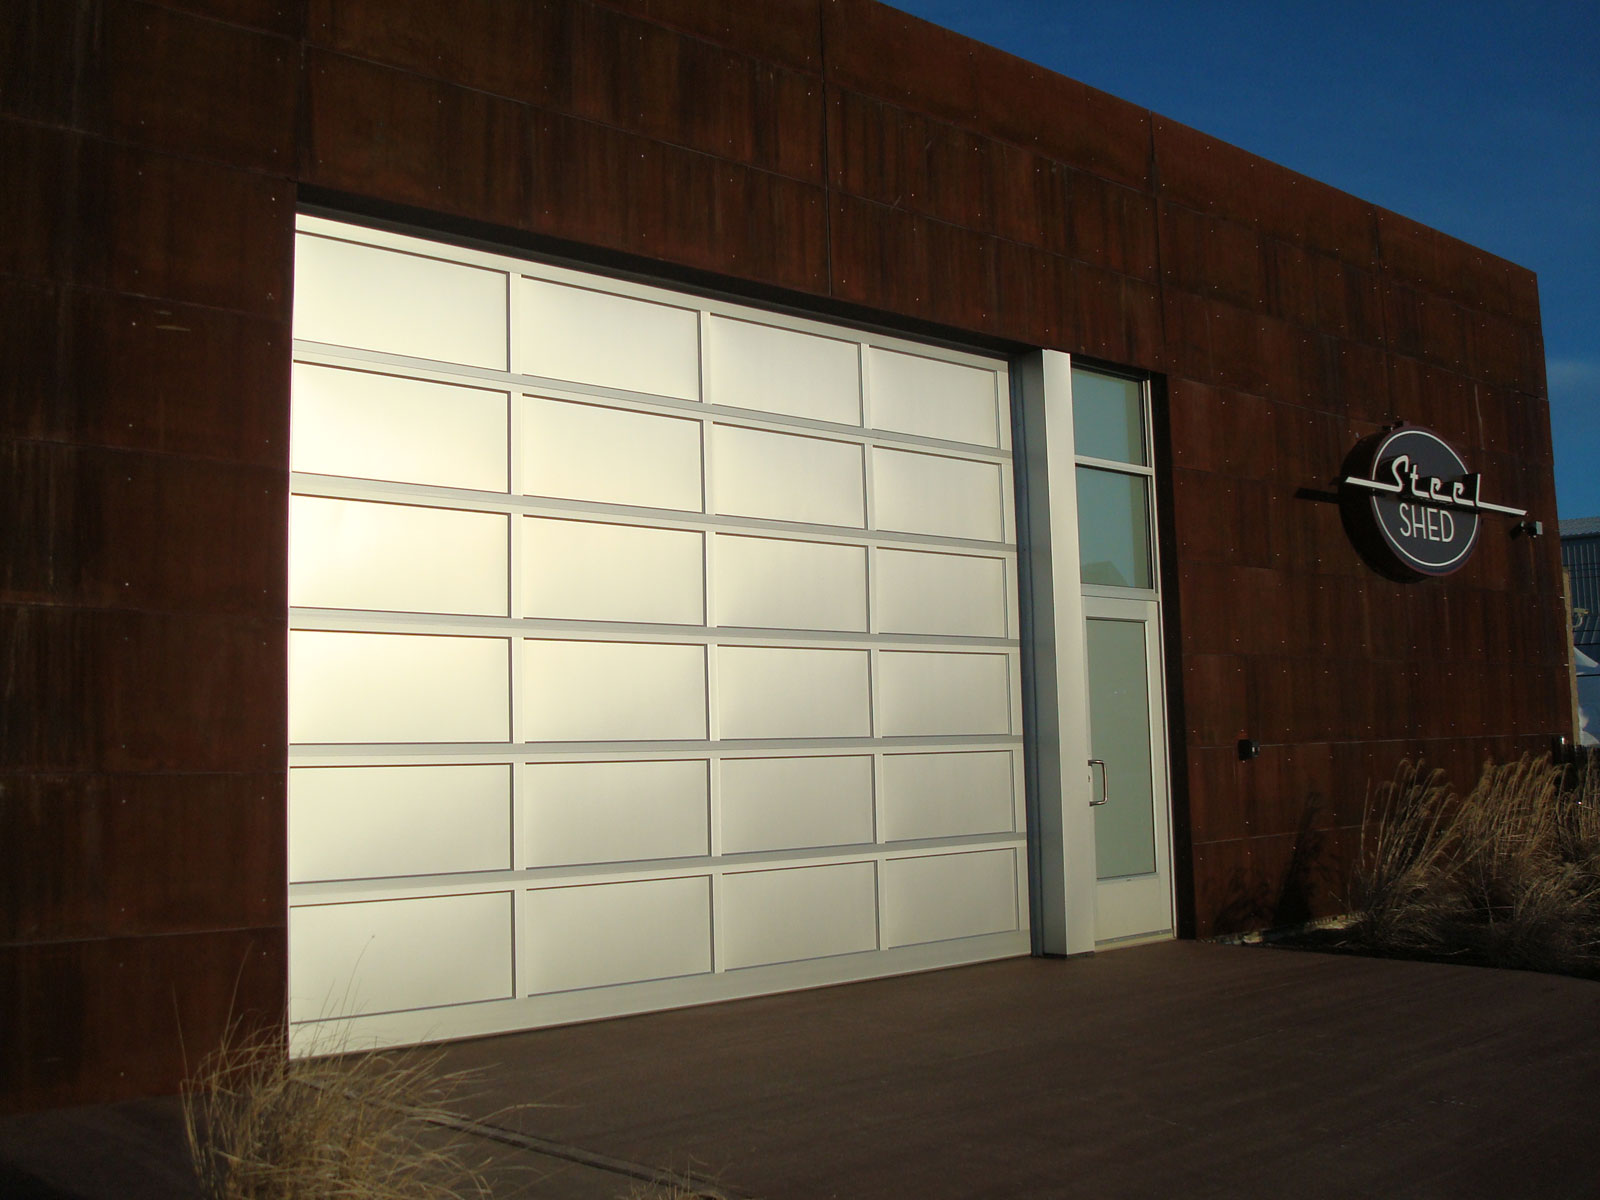 Modern Garage With Cool Modern Garage Doors Design With White Color Made From Wooden Material In Brown Brick Wall Decoration Decoration Fascinating Modern Garage Doors Used In Remarkable Designs